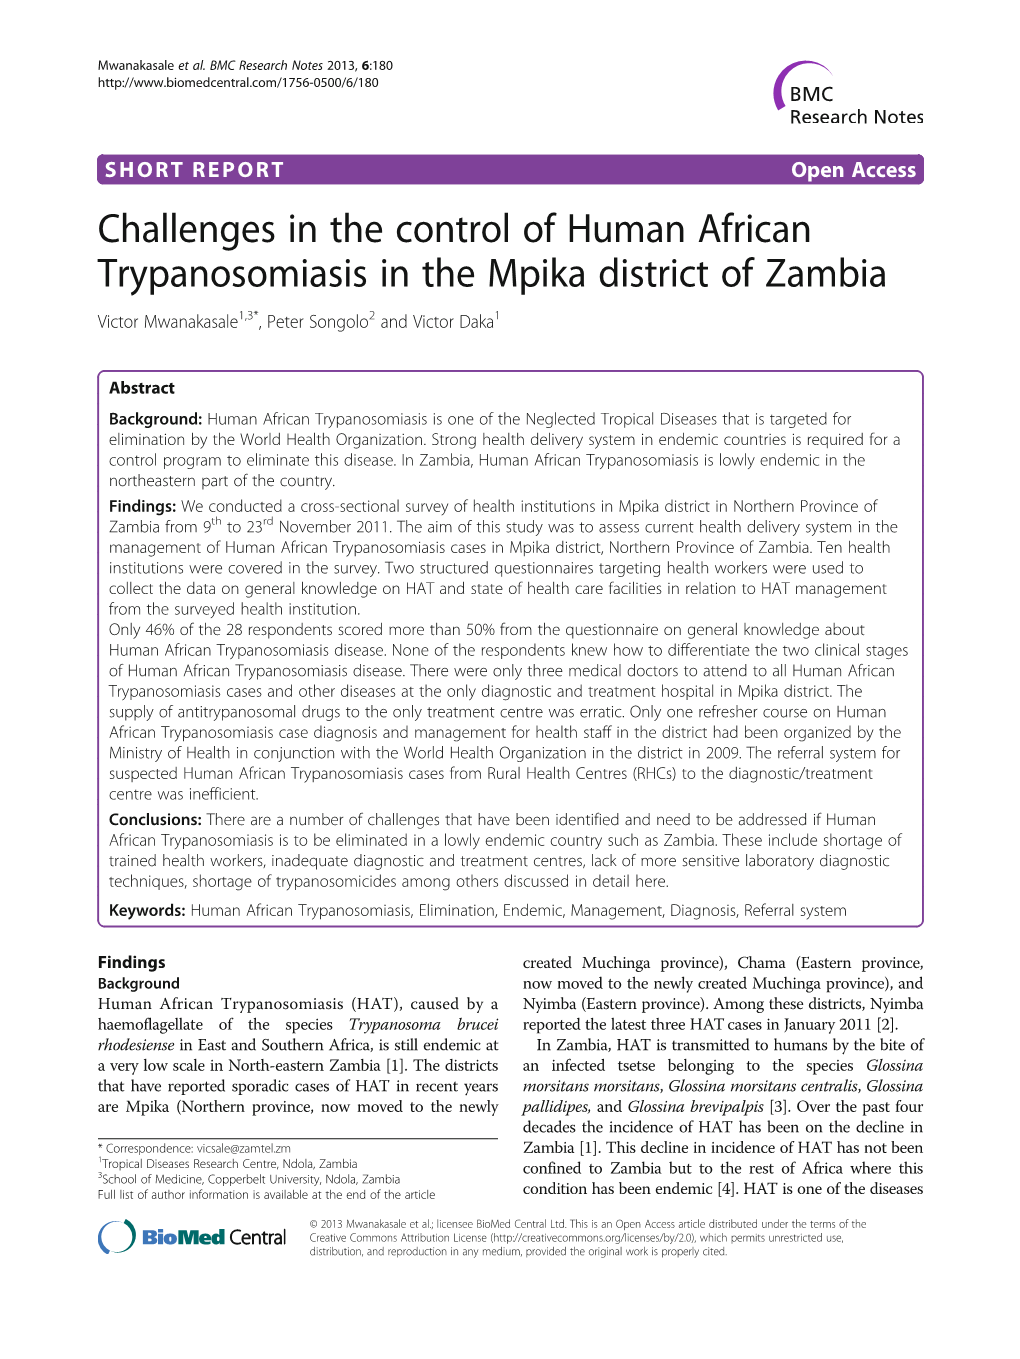 Challenges in the Control of Human African Trypanosomiasis in the Mpika District of Zambia Victor Mwanakasale1,3*, Peter Songolo2 and Victor Daka1